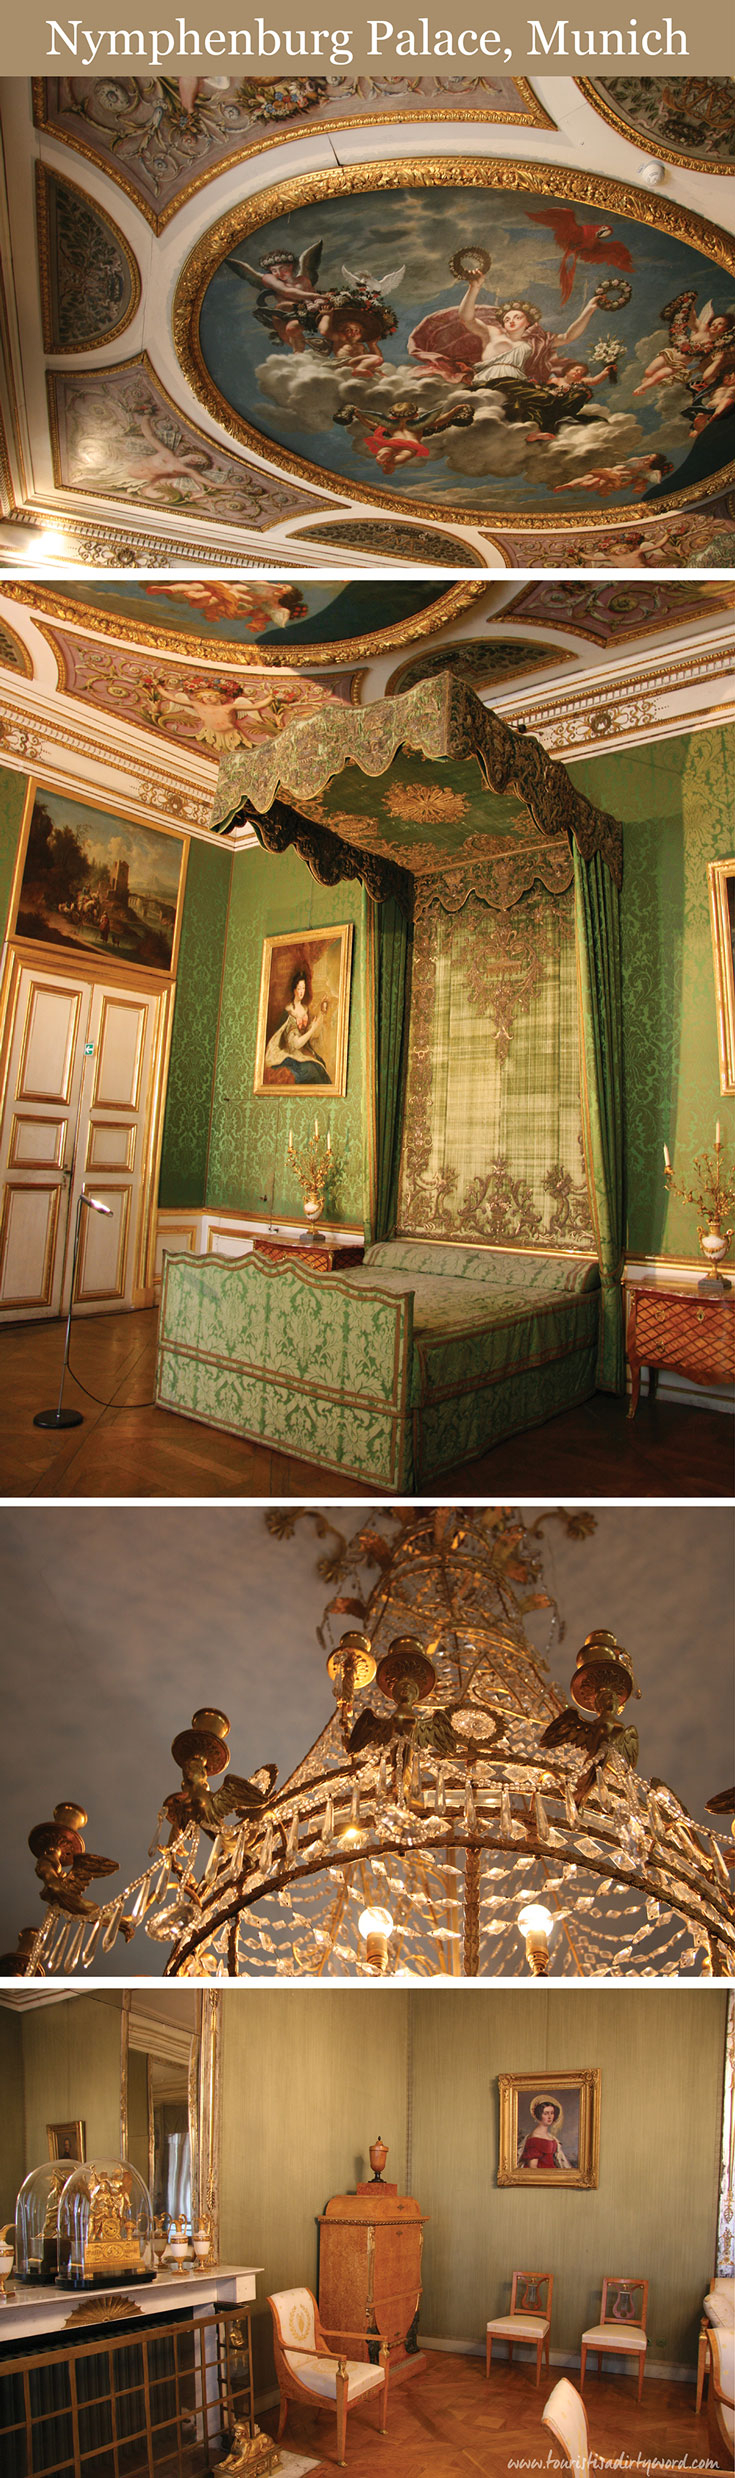 Nymphenburg Palace Bedrooms, Munich • Germany Travel Blog Tourist is a Dirty Word